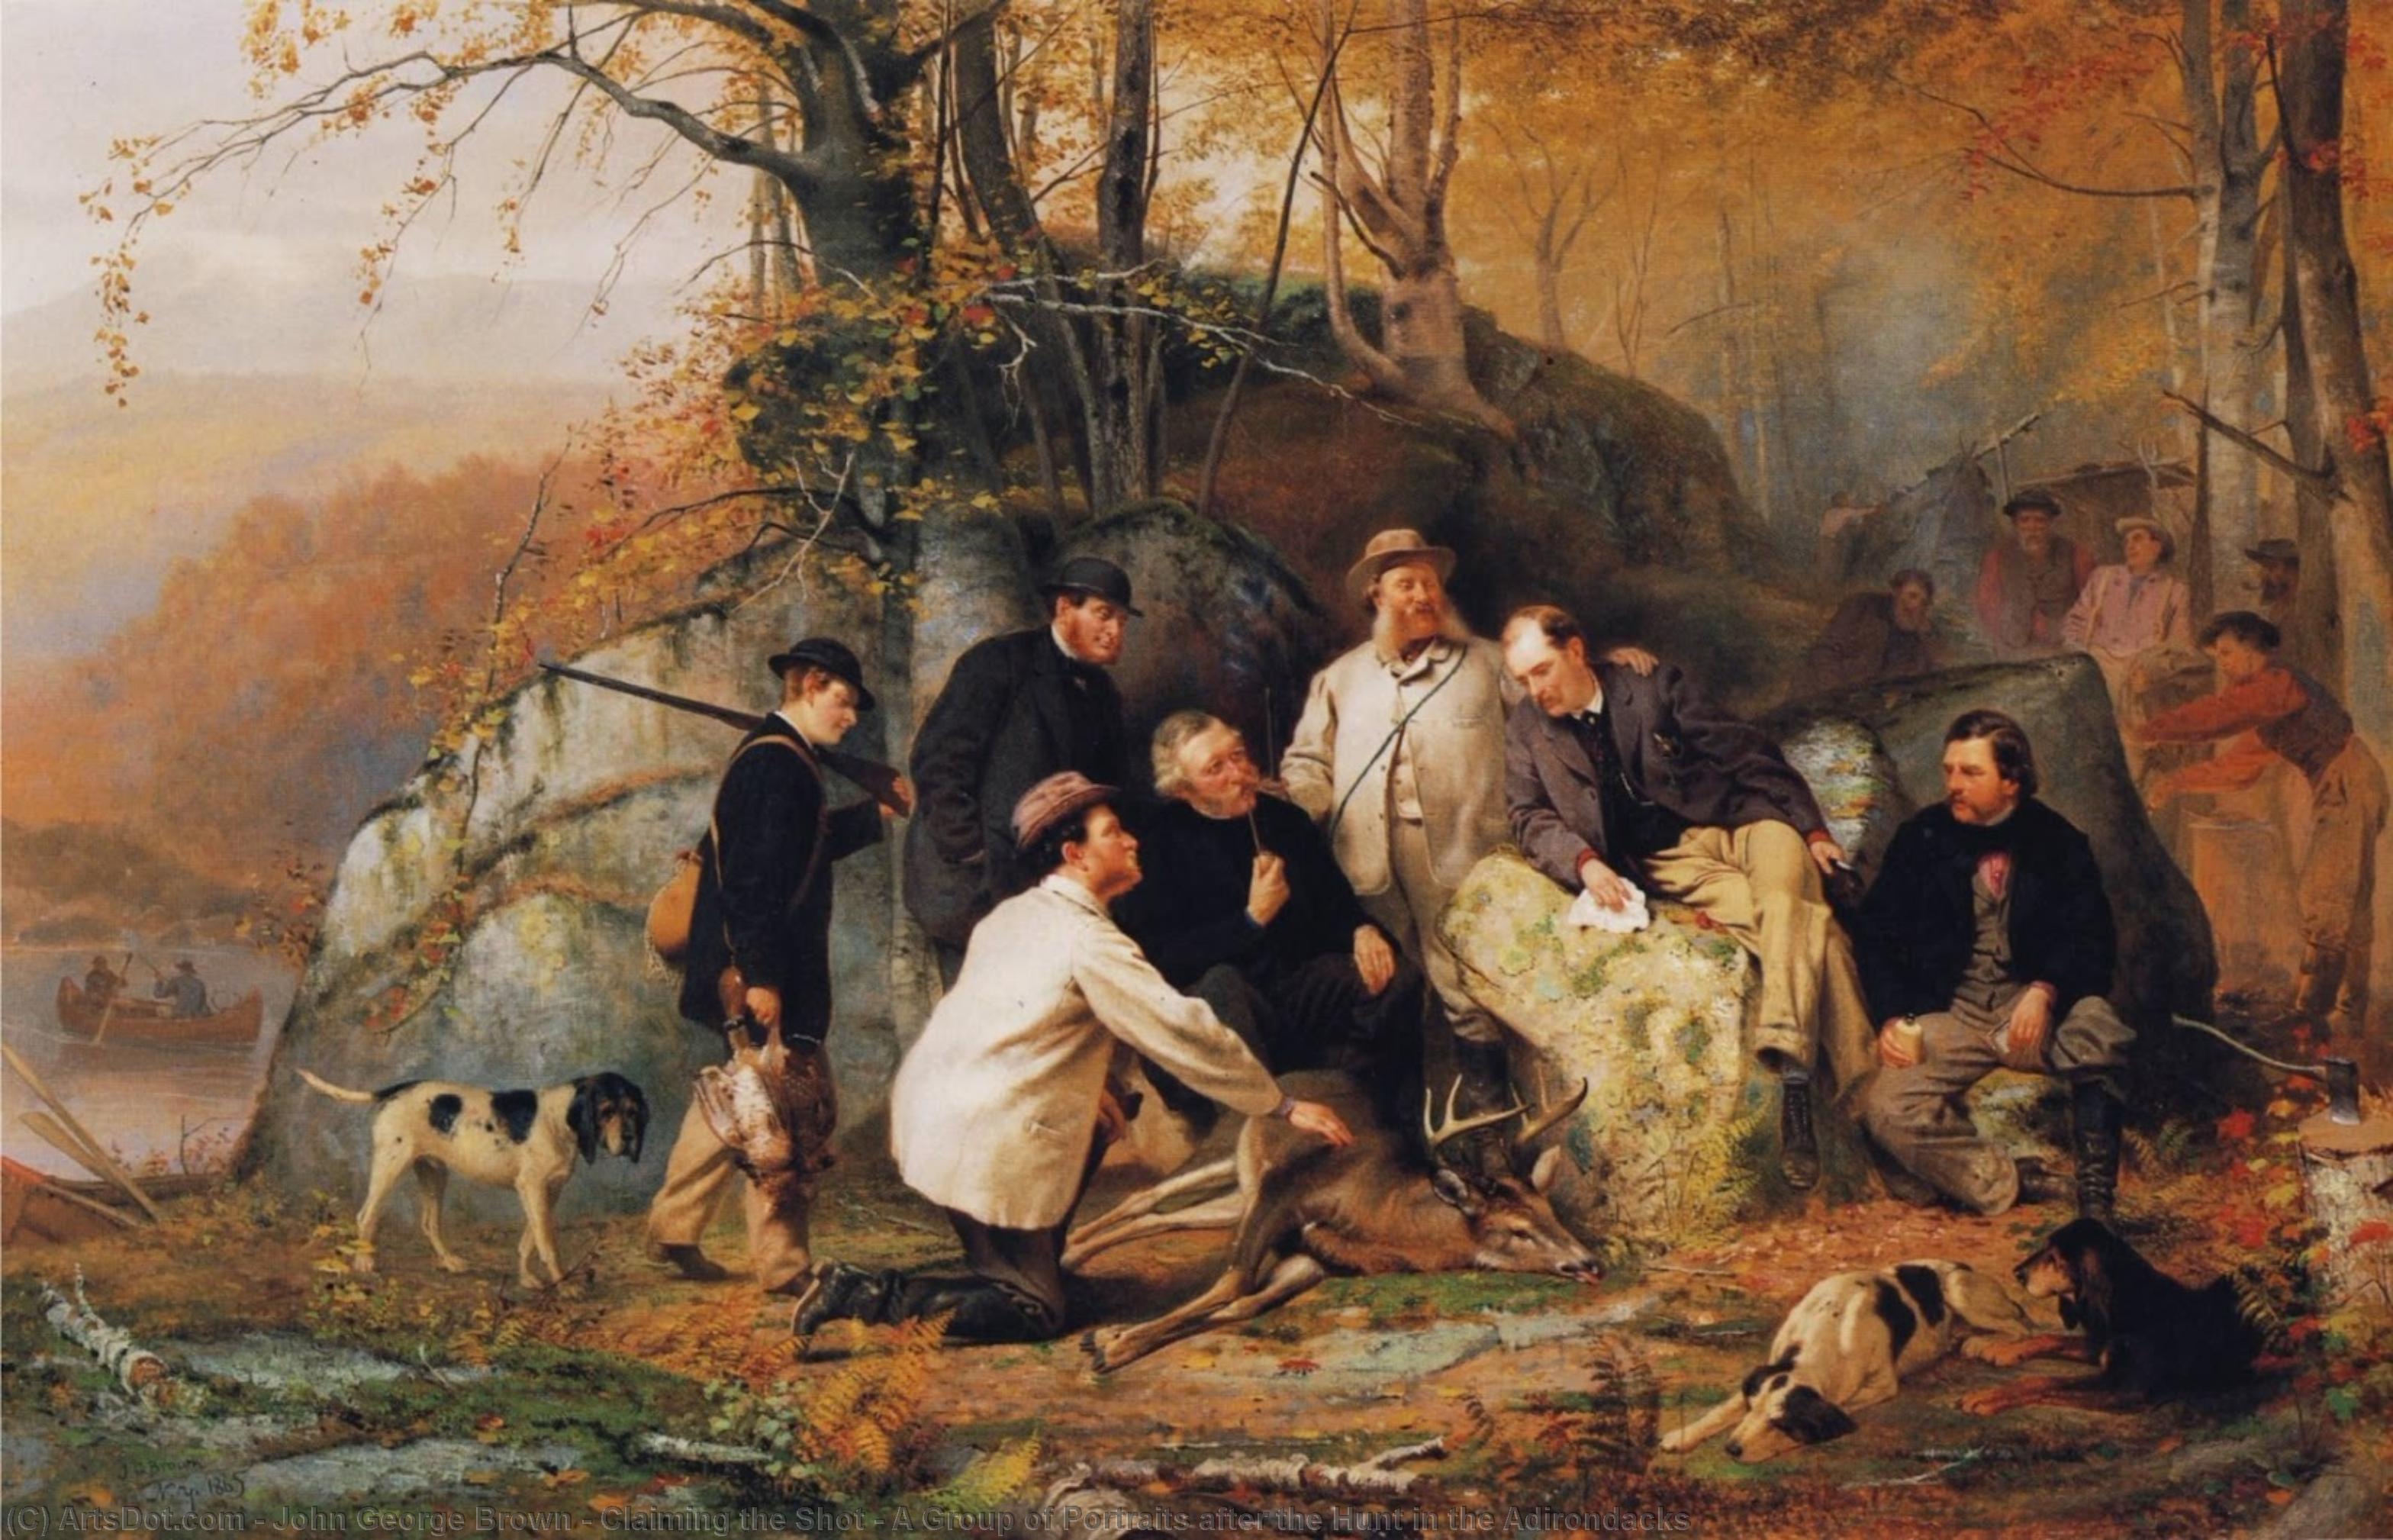 WikiOO.org - 백과 사전 - 회화, 삽화 John George Brown - Claiming the Shot - A Group of Portraits after the Hunt in the Adirondacks